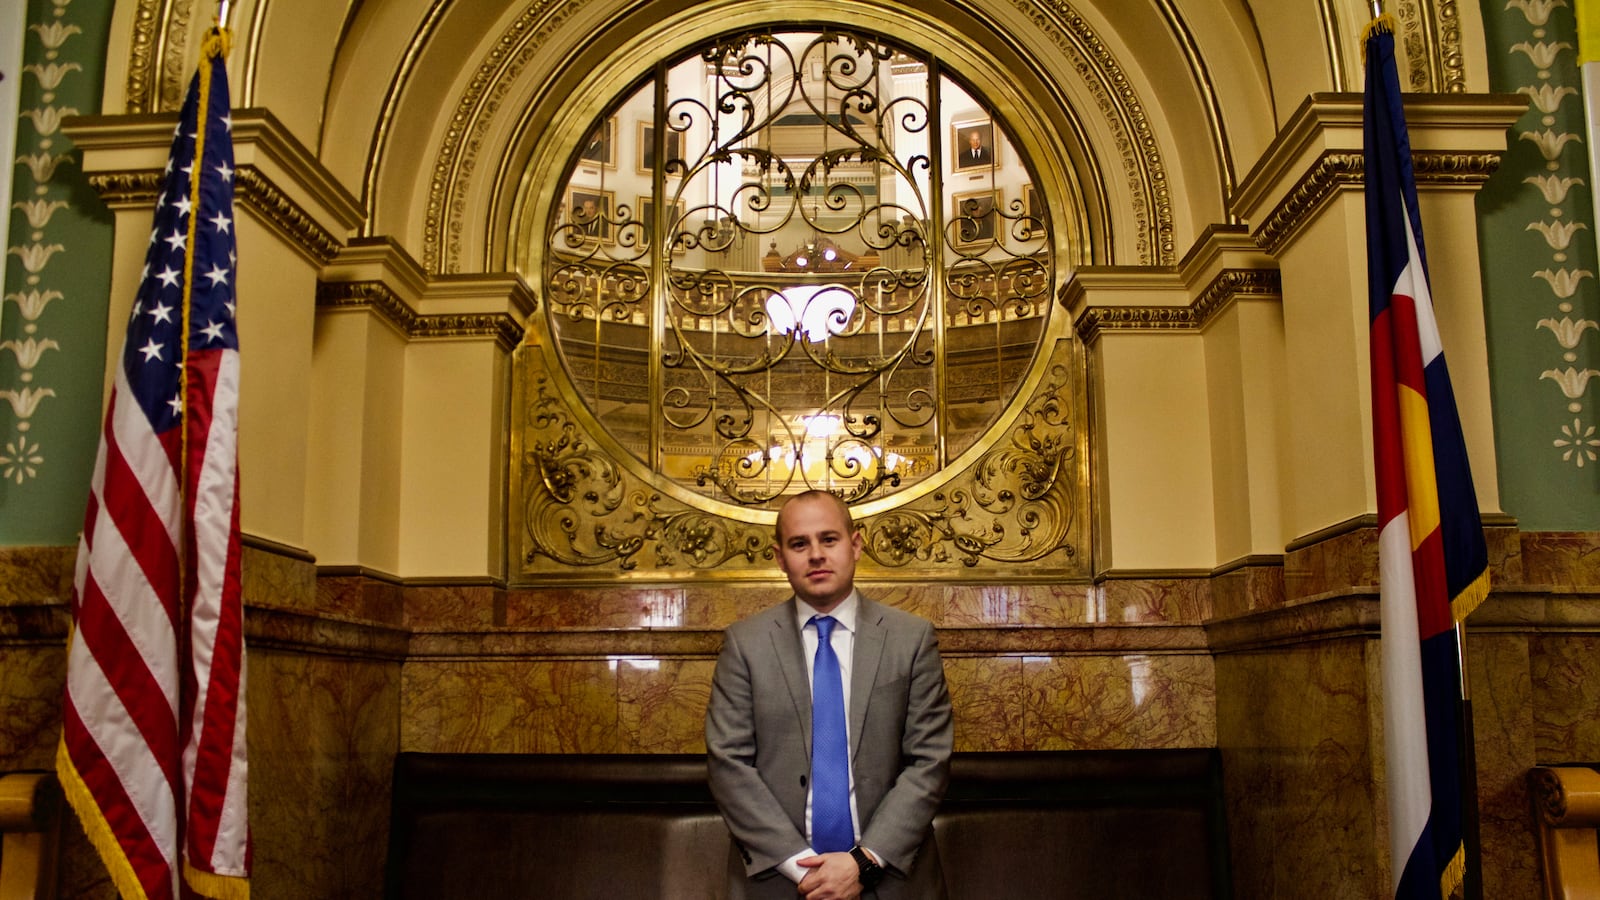 Luke Ragland is the first president of Ready Colorado, a nonprofit to support Republicans in favor of education reform. Ragland is pictured in the lobby of the Colorado House of Representatives.